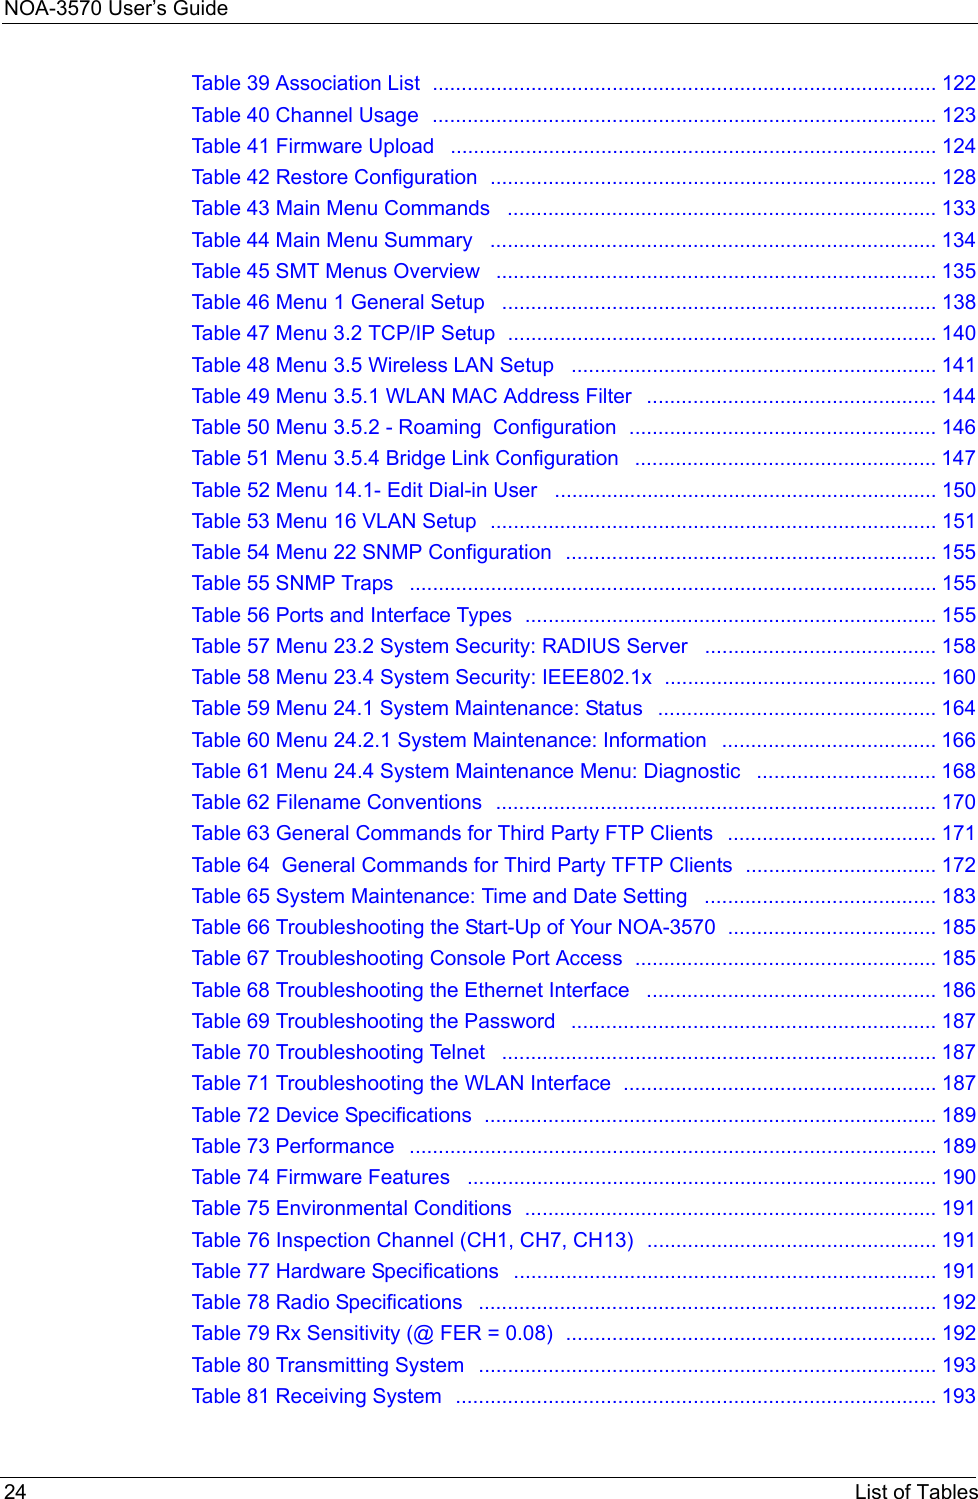 NOA-3570 User’s Guide24 List of TablesTable 39 Association List  ....................................................................................... 122Table 40 Channel Usage  ....................................................................................... 123Table 41 Firmware Upload   .................................................................................... 124Table 42 Restore Configuration  ............................................................................. 128Table 43 Main Menu Commands   .......................................................................... 133Table 44 Main Menu Summary   ............................................................................. 134Table 45 SMT Menus Overview   ............................................................................ 135Table 46 Menu 1 General Setup   ........................................................................... 138Table 47 Menu 3.2 TCP/IP Setup  .......................................................................... 140Table 48 Menu 3.5 Wireless LAN Setup   ............................................................... 141Table 49 Menu 3.5.1 WLAN MAC Address Filter   .................................................. 144Table 50 Menu 3.5.2 - Roaming  Configuration  ..................................................... 146Table 51 Menu 3.5.4 Bridge Link Configuration   .................................................... 147Table 52 Menu 14.1- Edit Dial-in User   .................................................................. 150Table 53 Menu 16 VLAN Setup  ............................................................................. 151Table 54 Menu 22 SNMP Configuration  ................................................................ 155Table 55 SNMP Traps   ........................................................................................... 155Table 56 Ports and Interface Types  ....................................................................... 155Table 57 Menu 23.2 System Security: RADIUS Server   ........................................ 158Table 58 Menu 23.4 System Security: IEEE802.1x  ............................................... 160Table 59 Menu 24.1 System Maintenance: Status   ................................................ 164Table 60 Menu 24.2.1 System Maintenance: Information   ..................................... 166Table 61 Menu 24.4 System Maintenance Menu: Diagnostic   ............................... 168Table 62 Filename Conventions  ............................................................................ 170Table 63 General Commands for Third Party FTP Clients   .................................... 171Table 64  General Commands for Third Party TFTP Clients  ................................. 172Table 65 System Maintenance: Time and Date Setting   ........................................ 183Table 66 Troubleshooting the Start-Up of Your NOA-3570  .................................... 185Table 67 Troubleshooting Console Port Access  .................................................... 185Table 68 Troubleshooting the Ethernet Interface   .................................................. 186Table 69 Troubleshooting the Password   ............................................................... 187Table 70 Troubleshooting Telnet   ........................................................................... 187Table 71 Troubleshooting the WLAN Interface  ...................................................... 187Table 72 Device Specifications  .............................................................................. 189Table 73 Performance   ........................................................................................... 189Table 74 Firmware Features   ................................................................................. 190Table 75 Environmental Conditions  ....................................................................... 191Table 76 Inspection Channel (CH1, CH7, CH13)  .................................................. 191Table 77 Hardware Specifications   ......................................................................... 191Table 78 Radio Specifications   ............................................................................... 192Table 79 Rx Sensitivity (@ FER = 0.08)  ................................................................ 192Table 80 Transmitting System   ............................................................................... 193Table 81 Receiving System  ................................................................................... 193